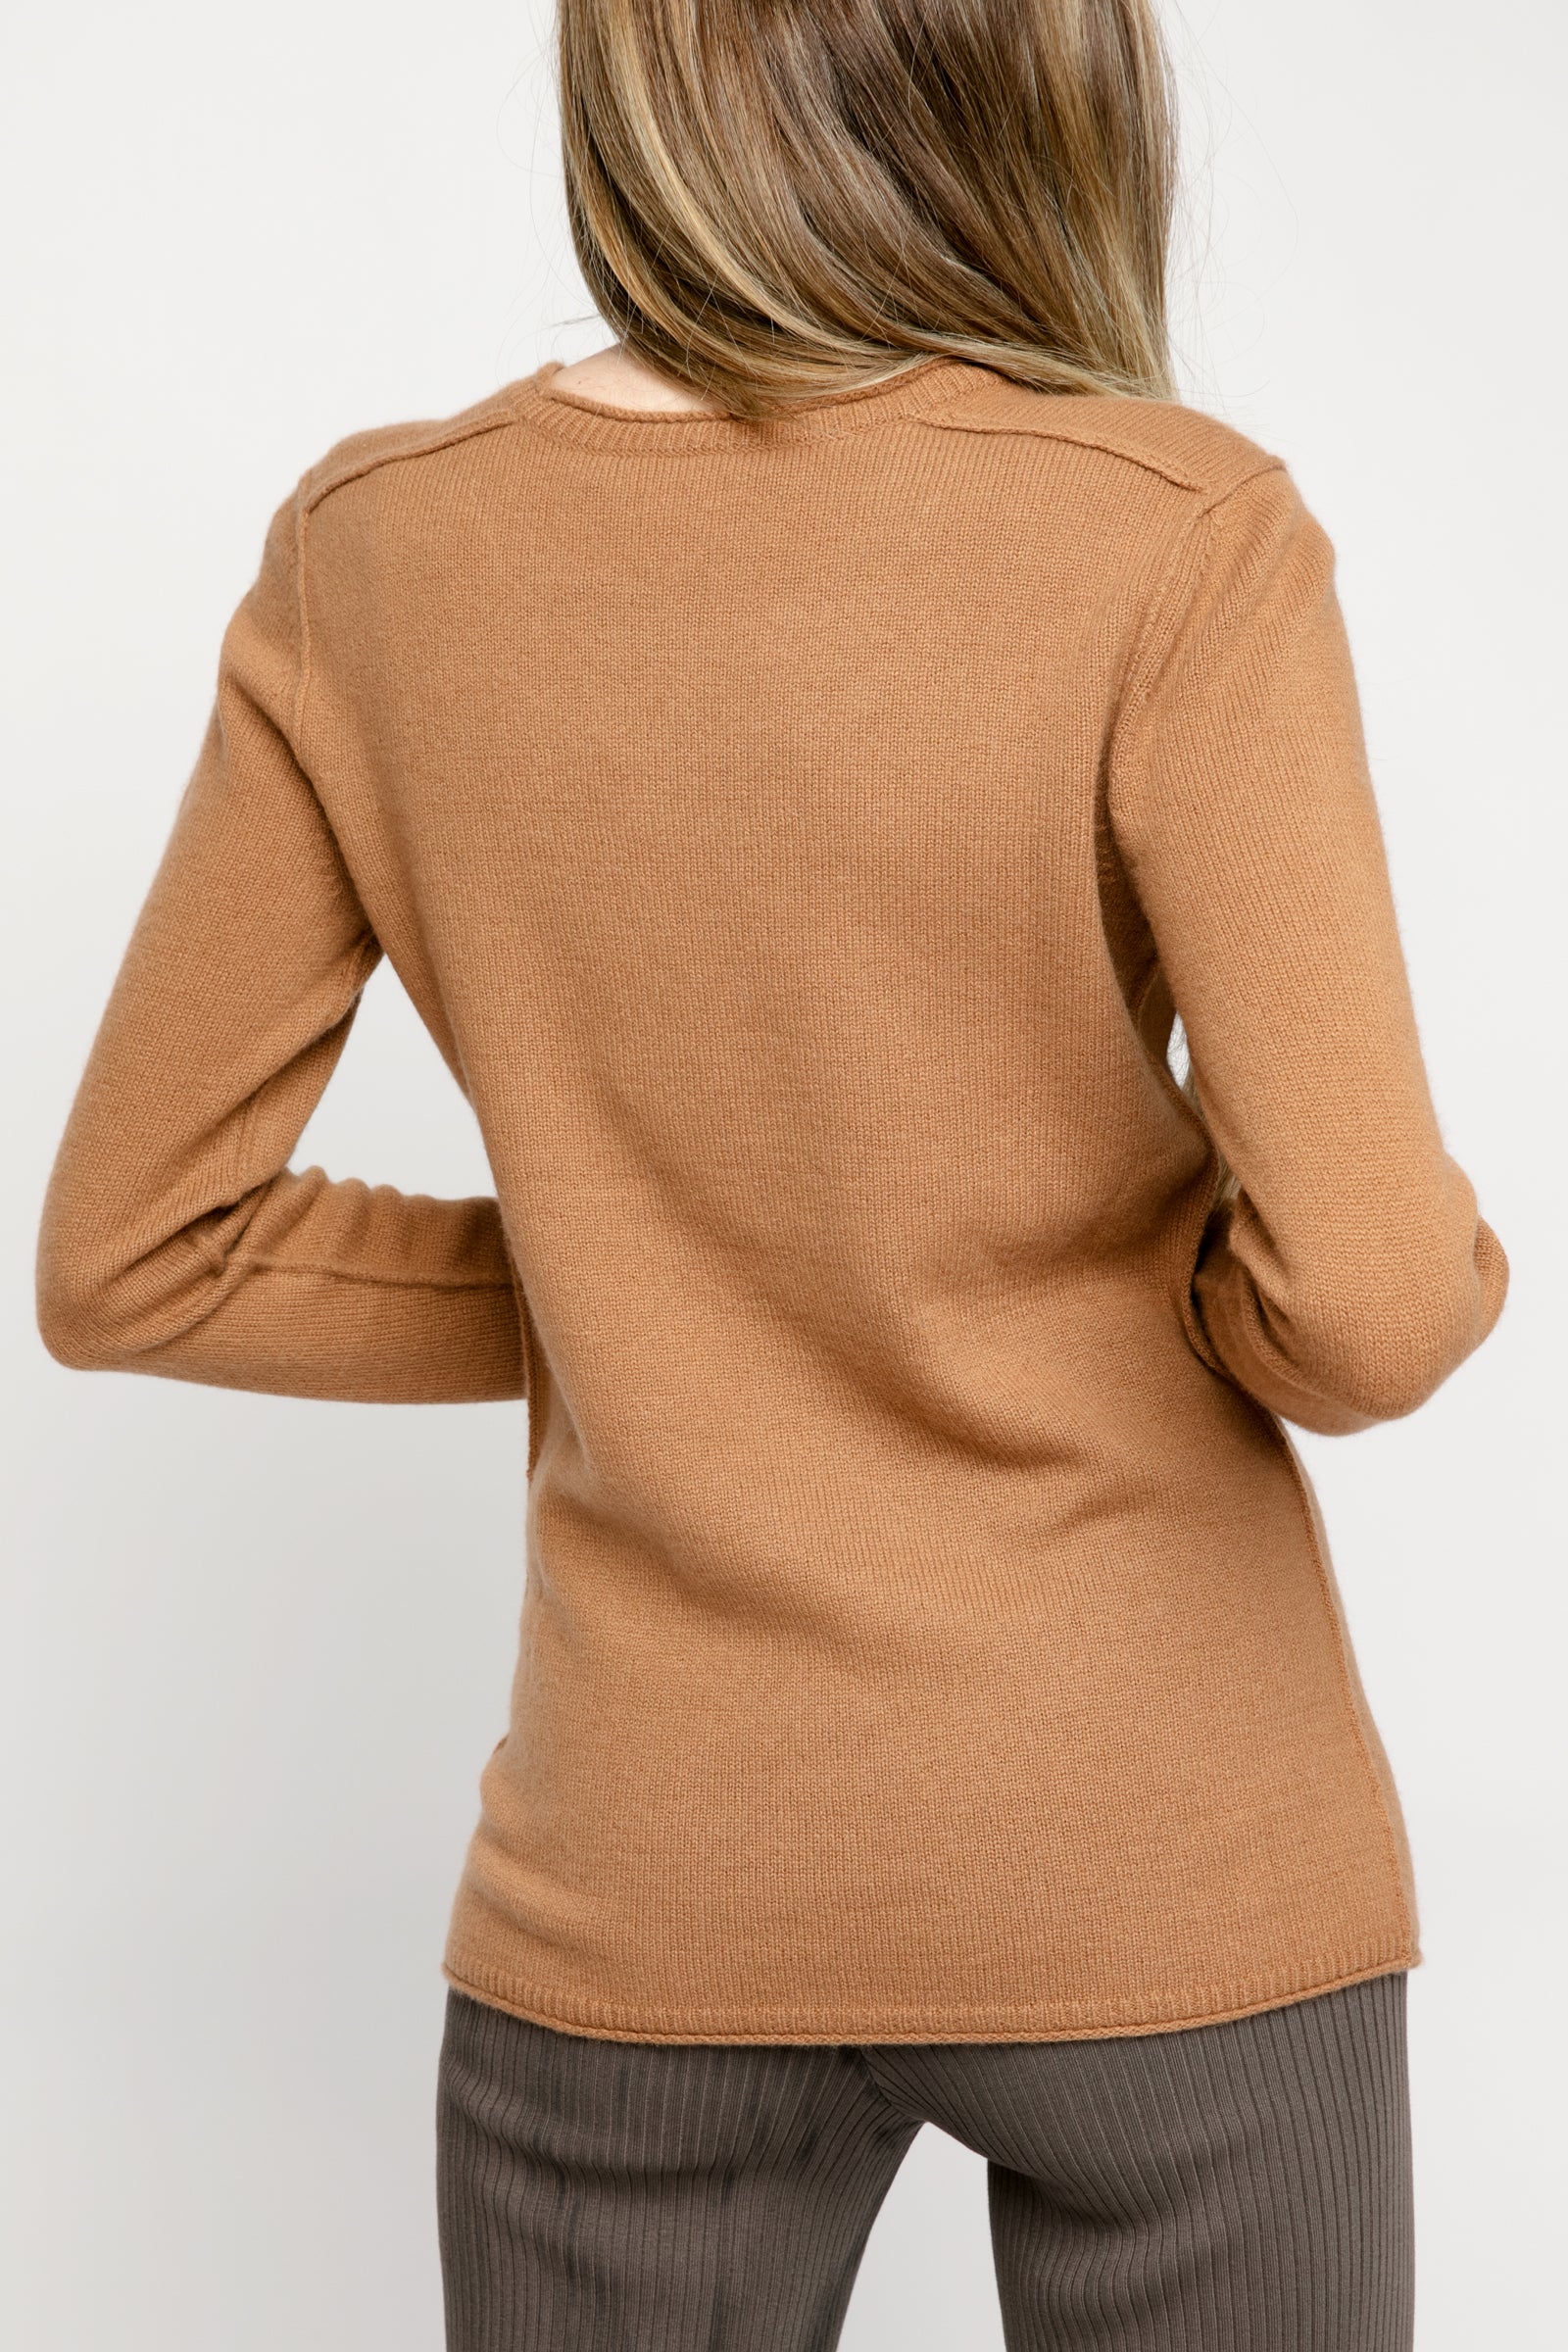 PAYCHI GUH Cozy Luxe Baby Cashmere Crew in Camel